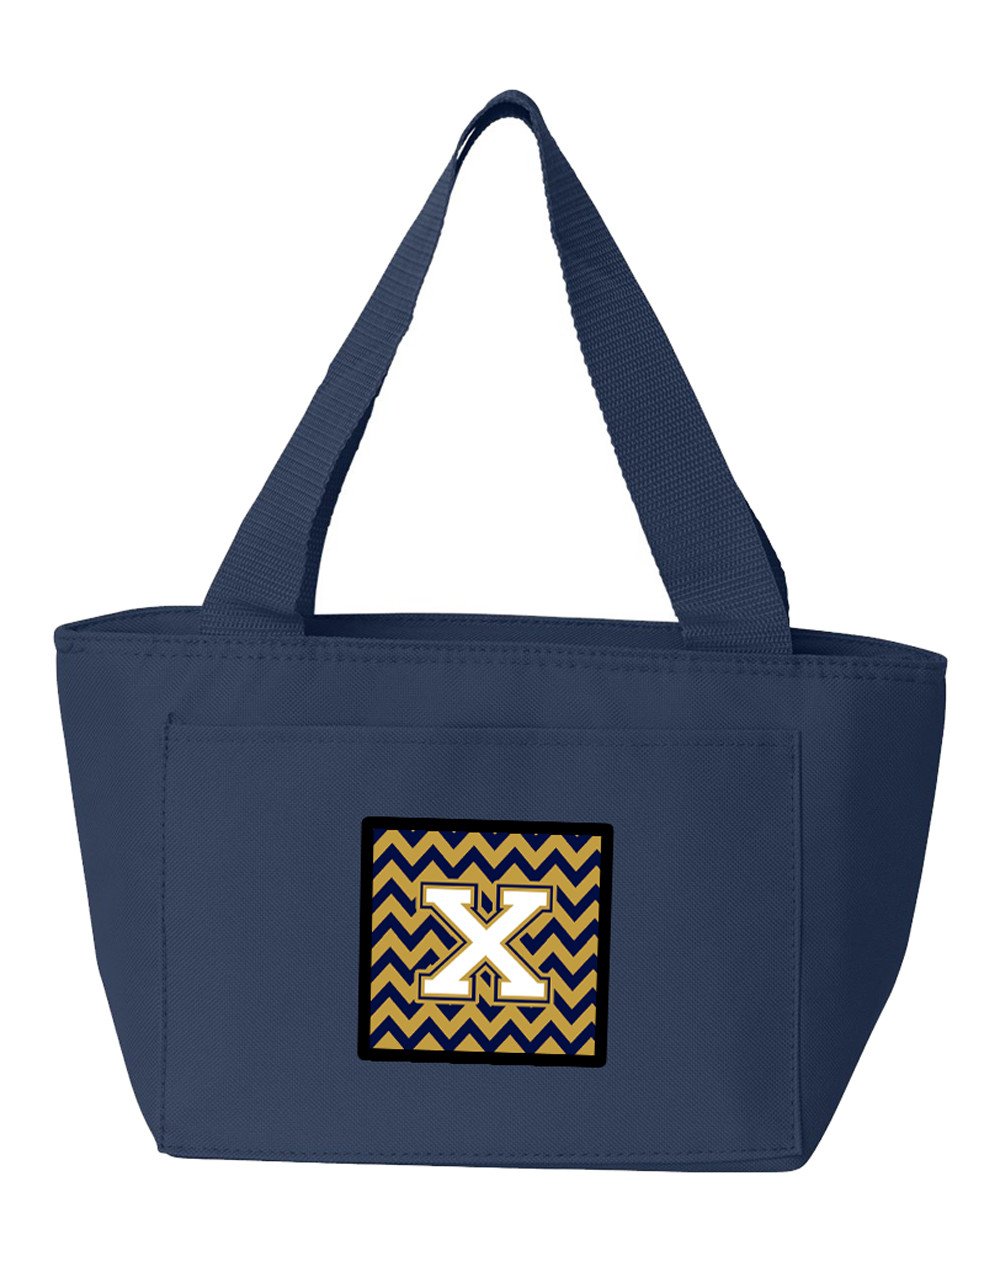 Letter X Chevron Navy Blue and Gold Lunch Bag CJ1057-XNA-8808 by Caroline's Treasures